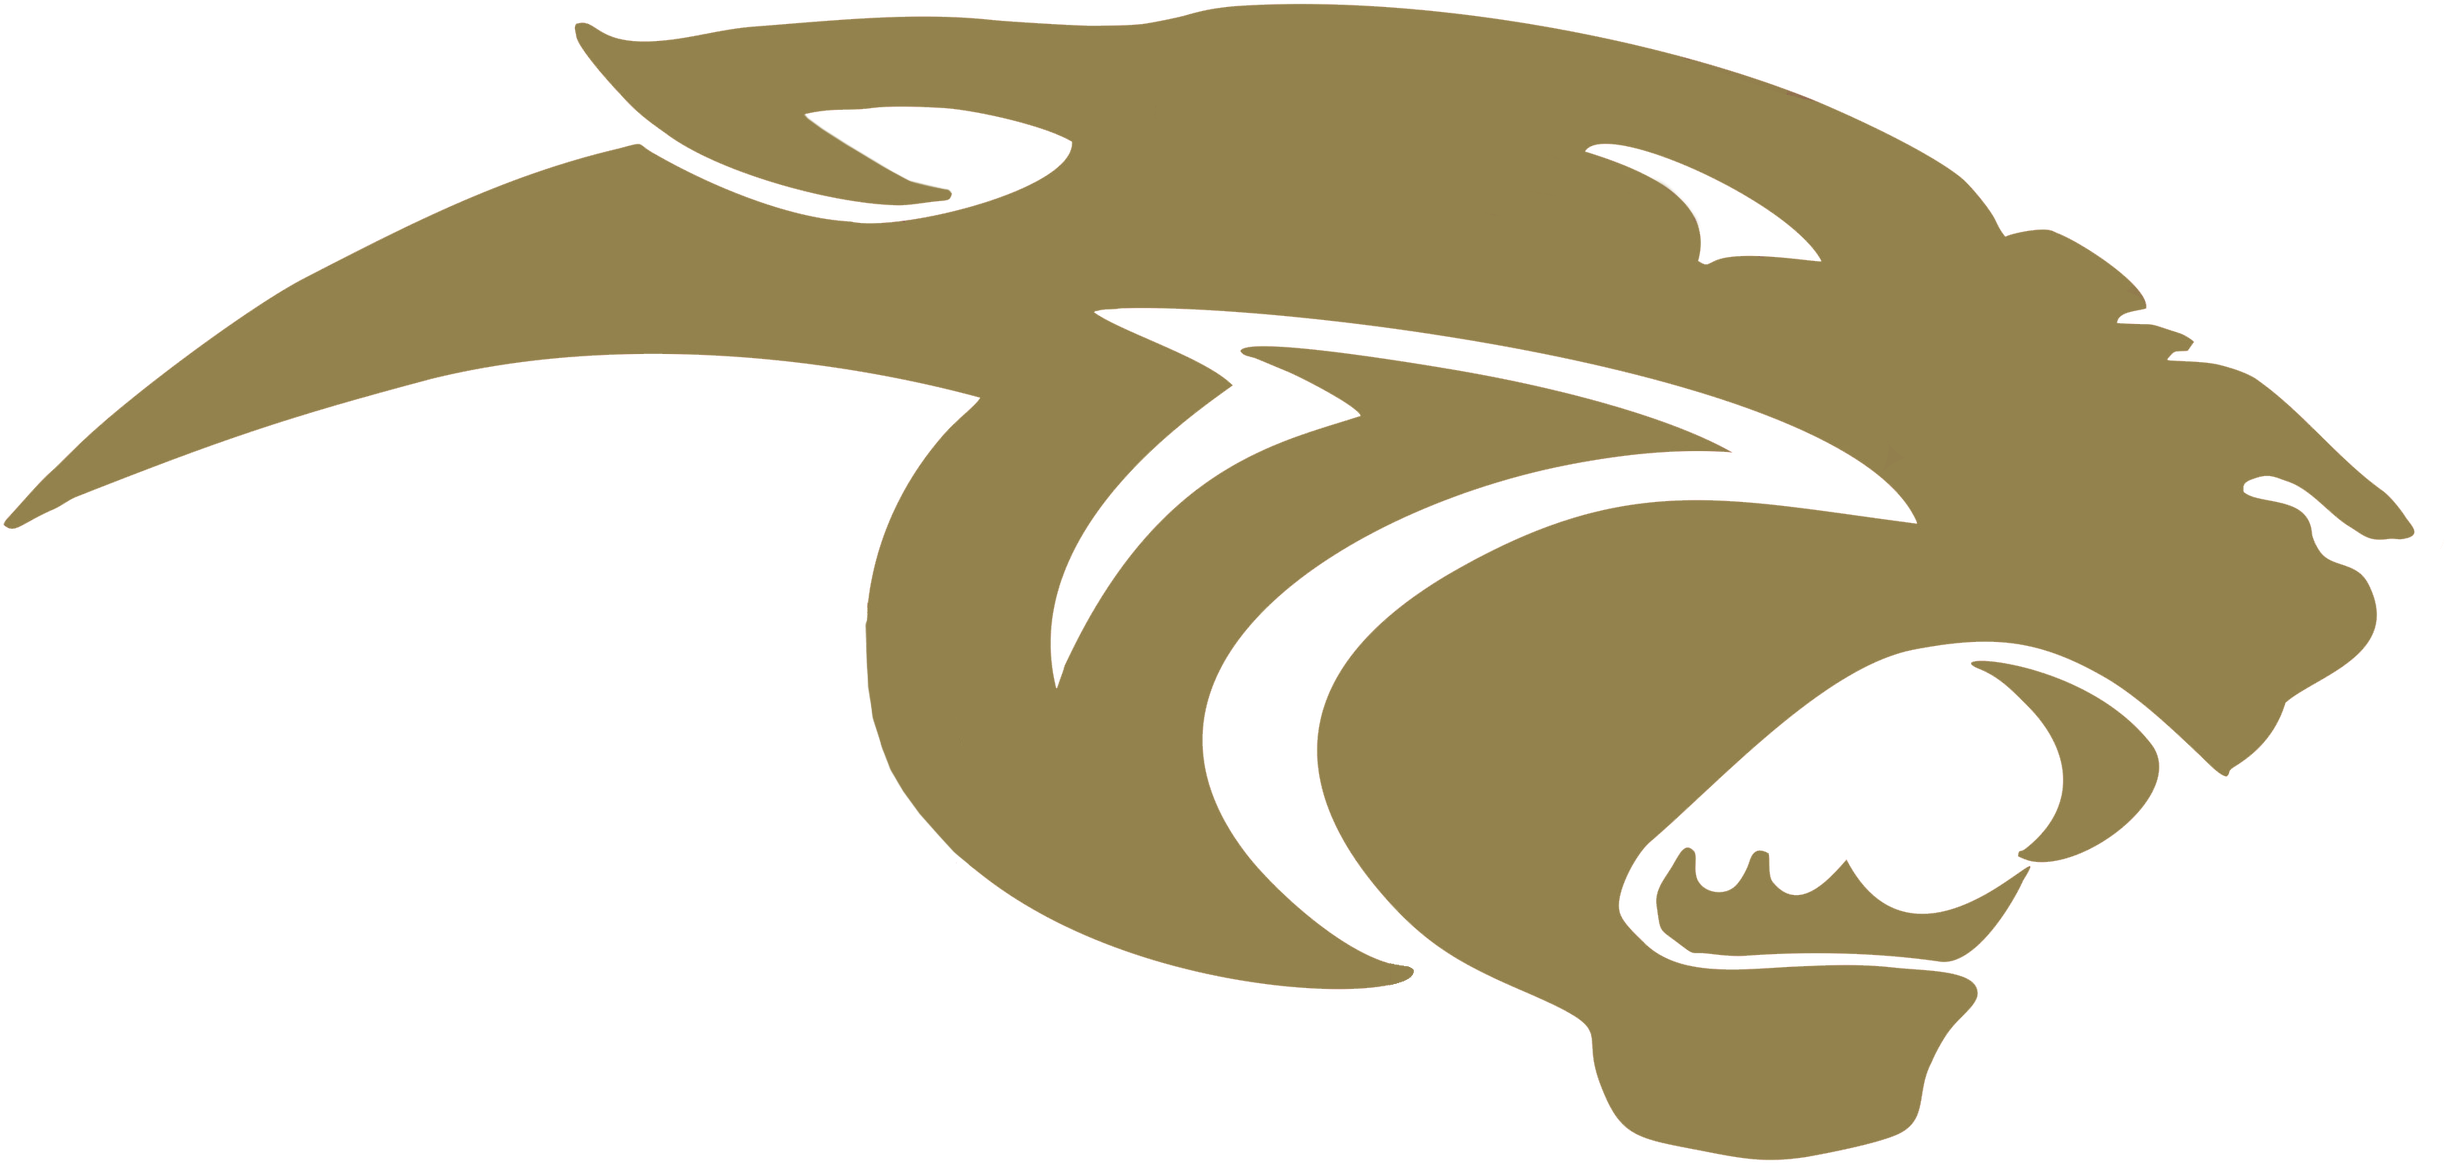 A Gold Logo With A Black Background